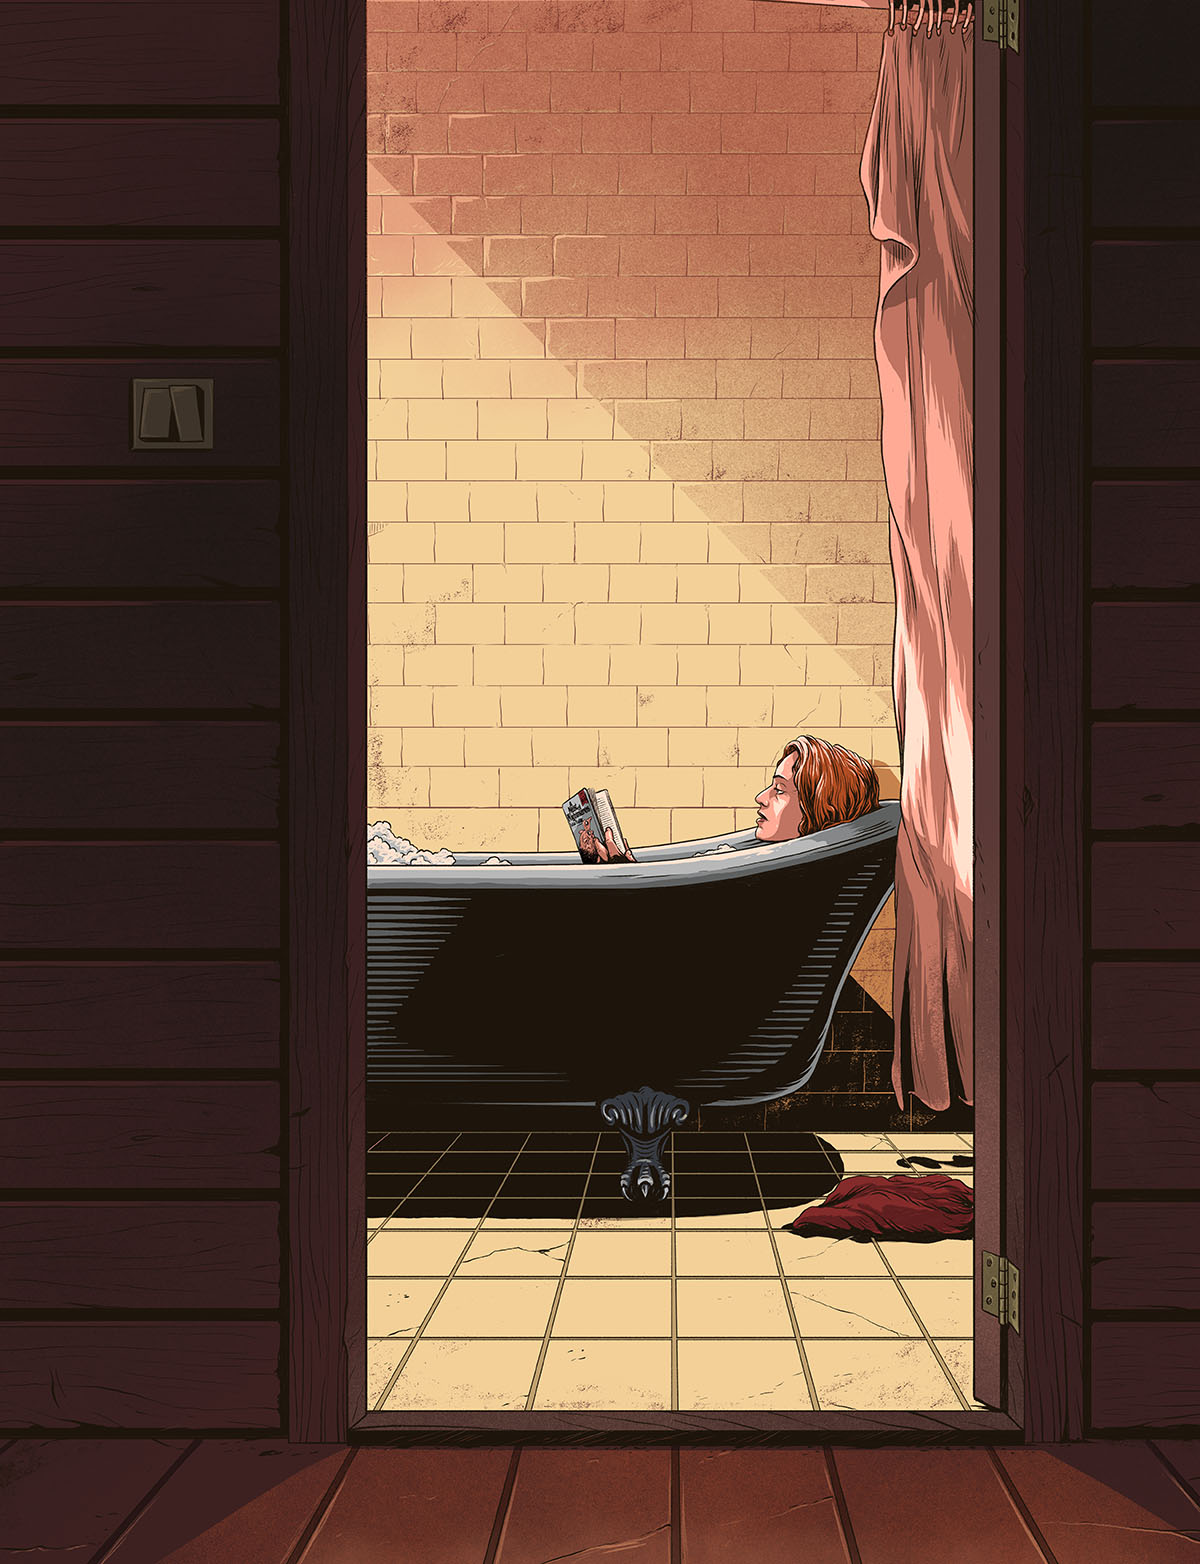 An illustration of a woman reading in a bathtub